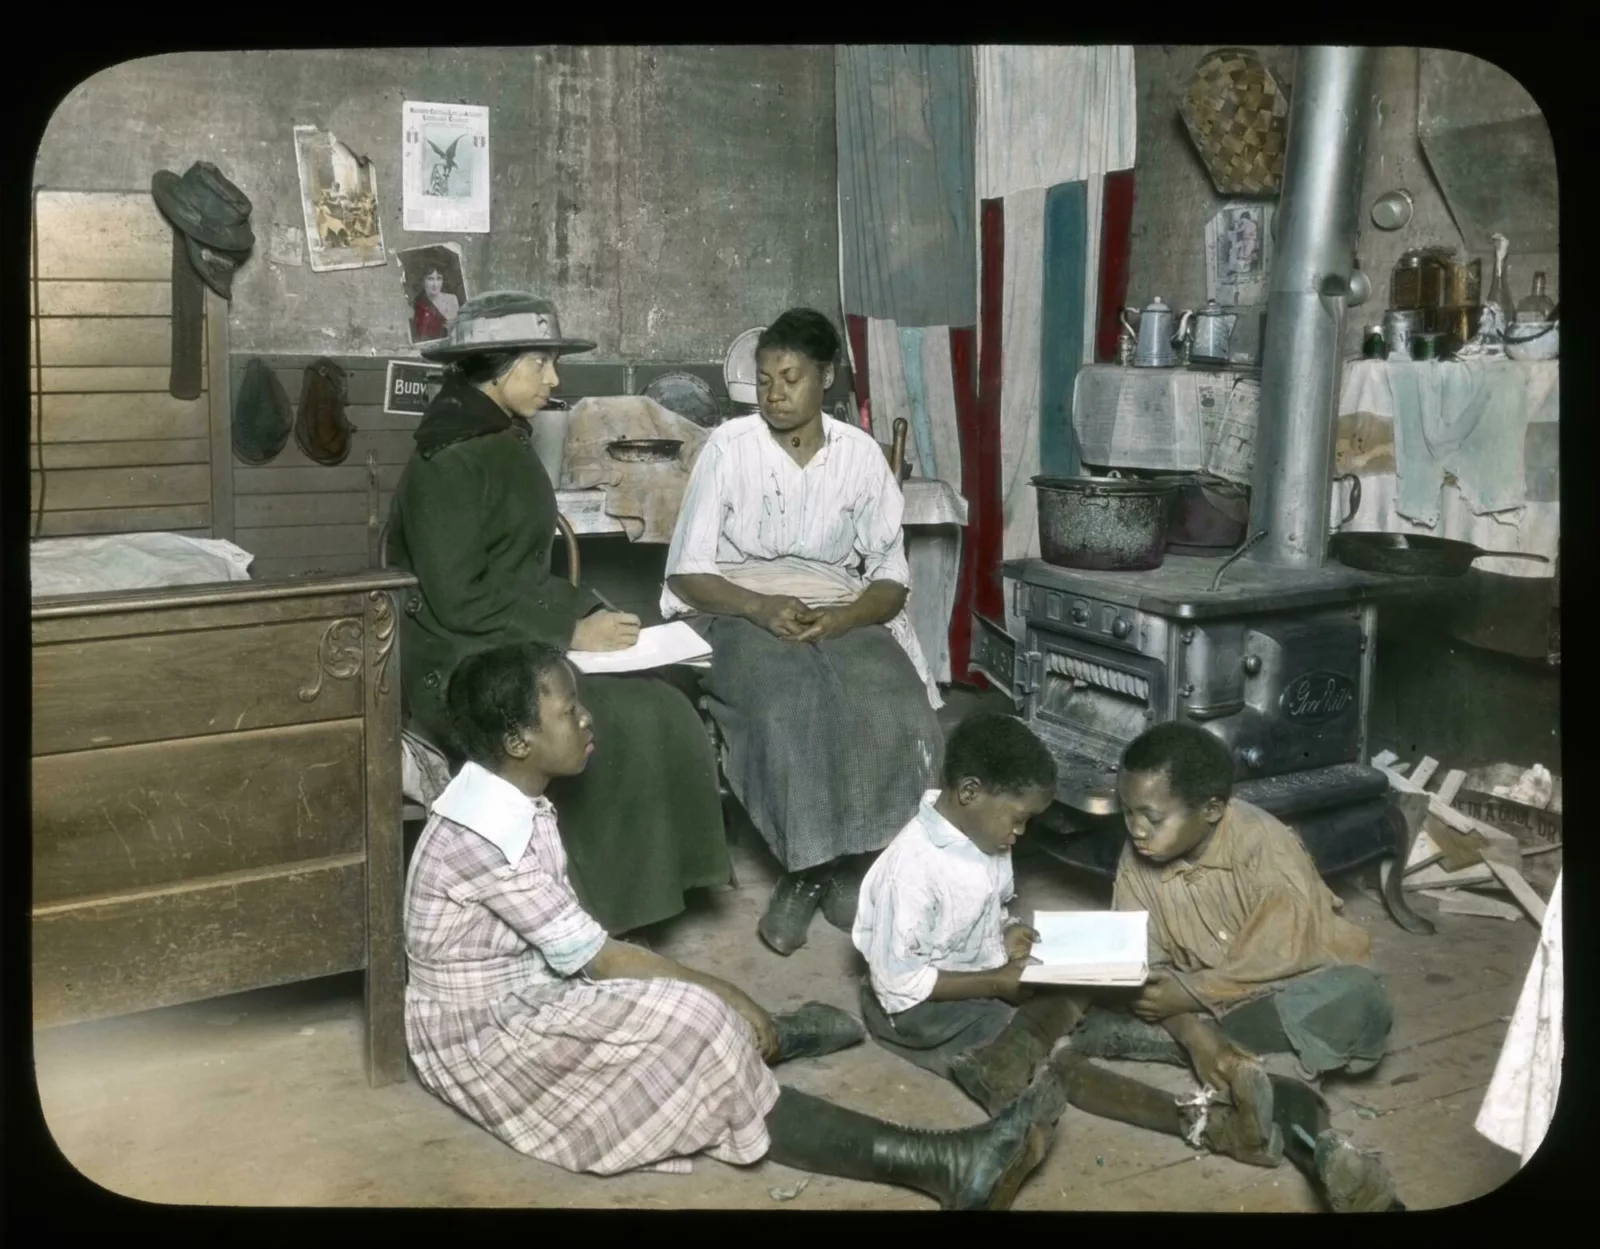 A social service worker sits on a chair next to a woman. Three children sit on the floor and look at a book together.